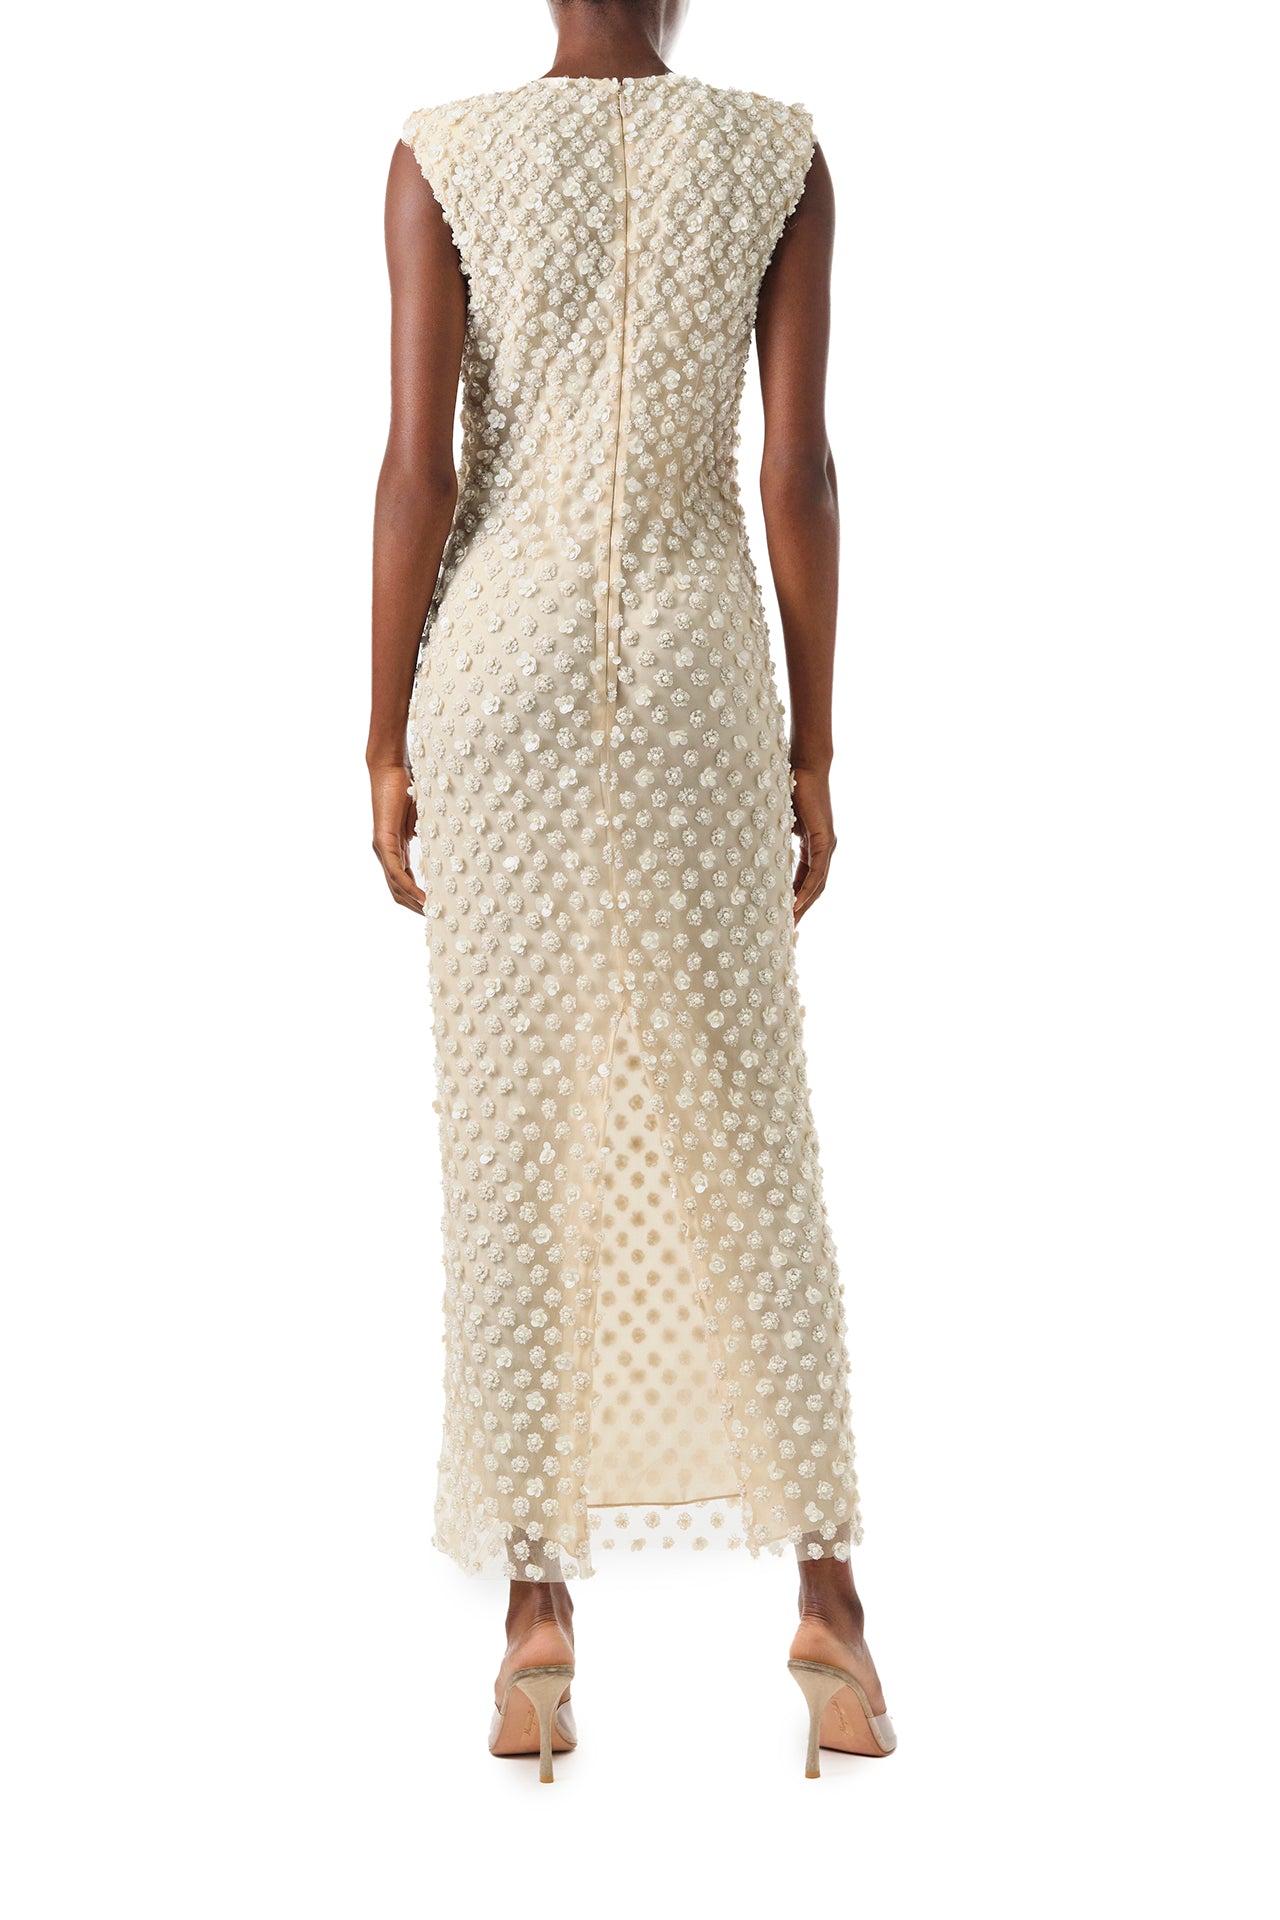 Monique Lhuillier Fall 2024 sleeveless, pearl embroidered sheath with jewel neckline - back.